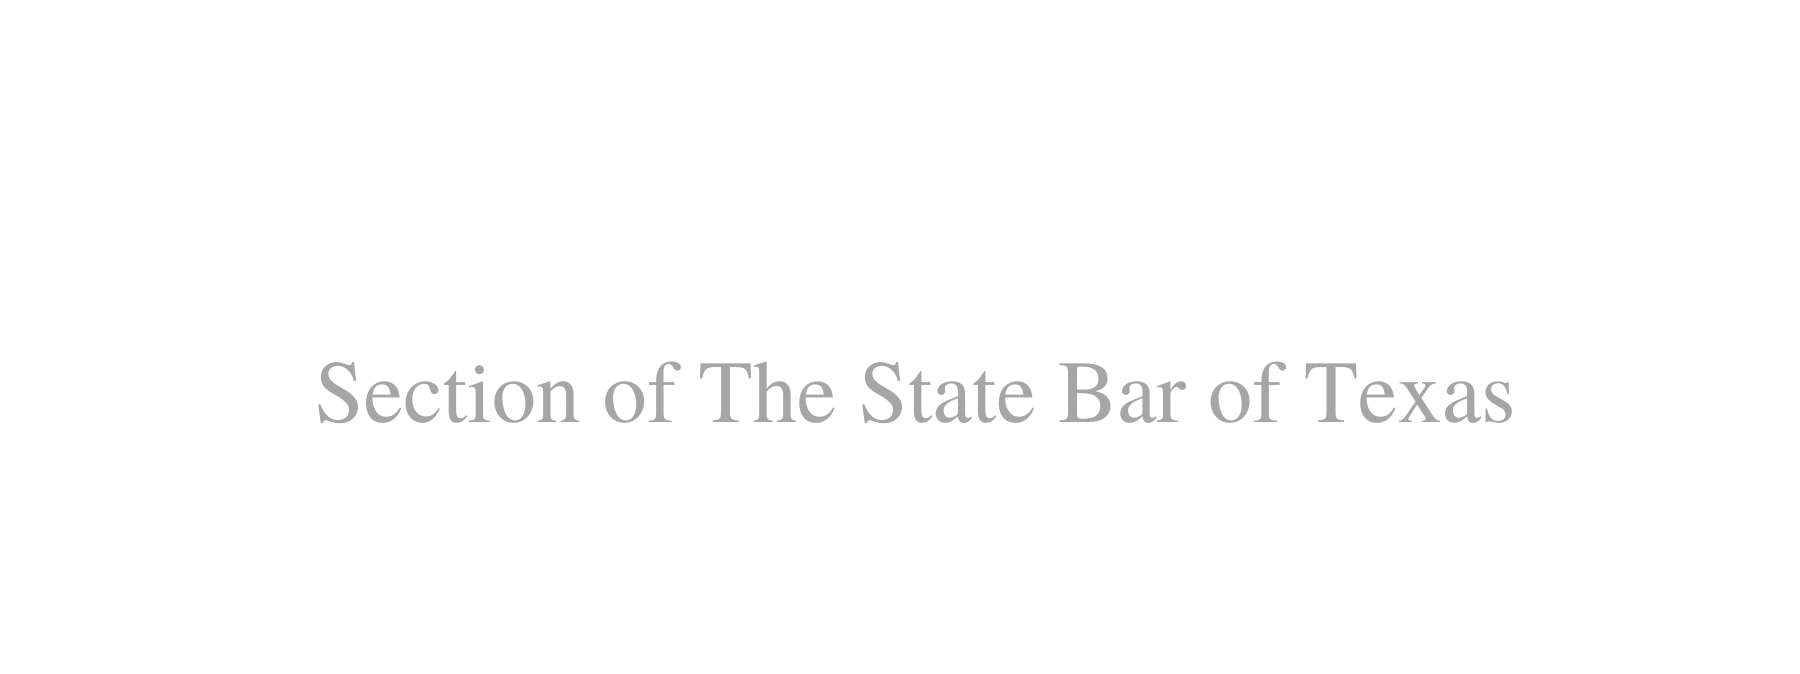 Legislative and Campaign Law State Bar of Texas